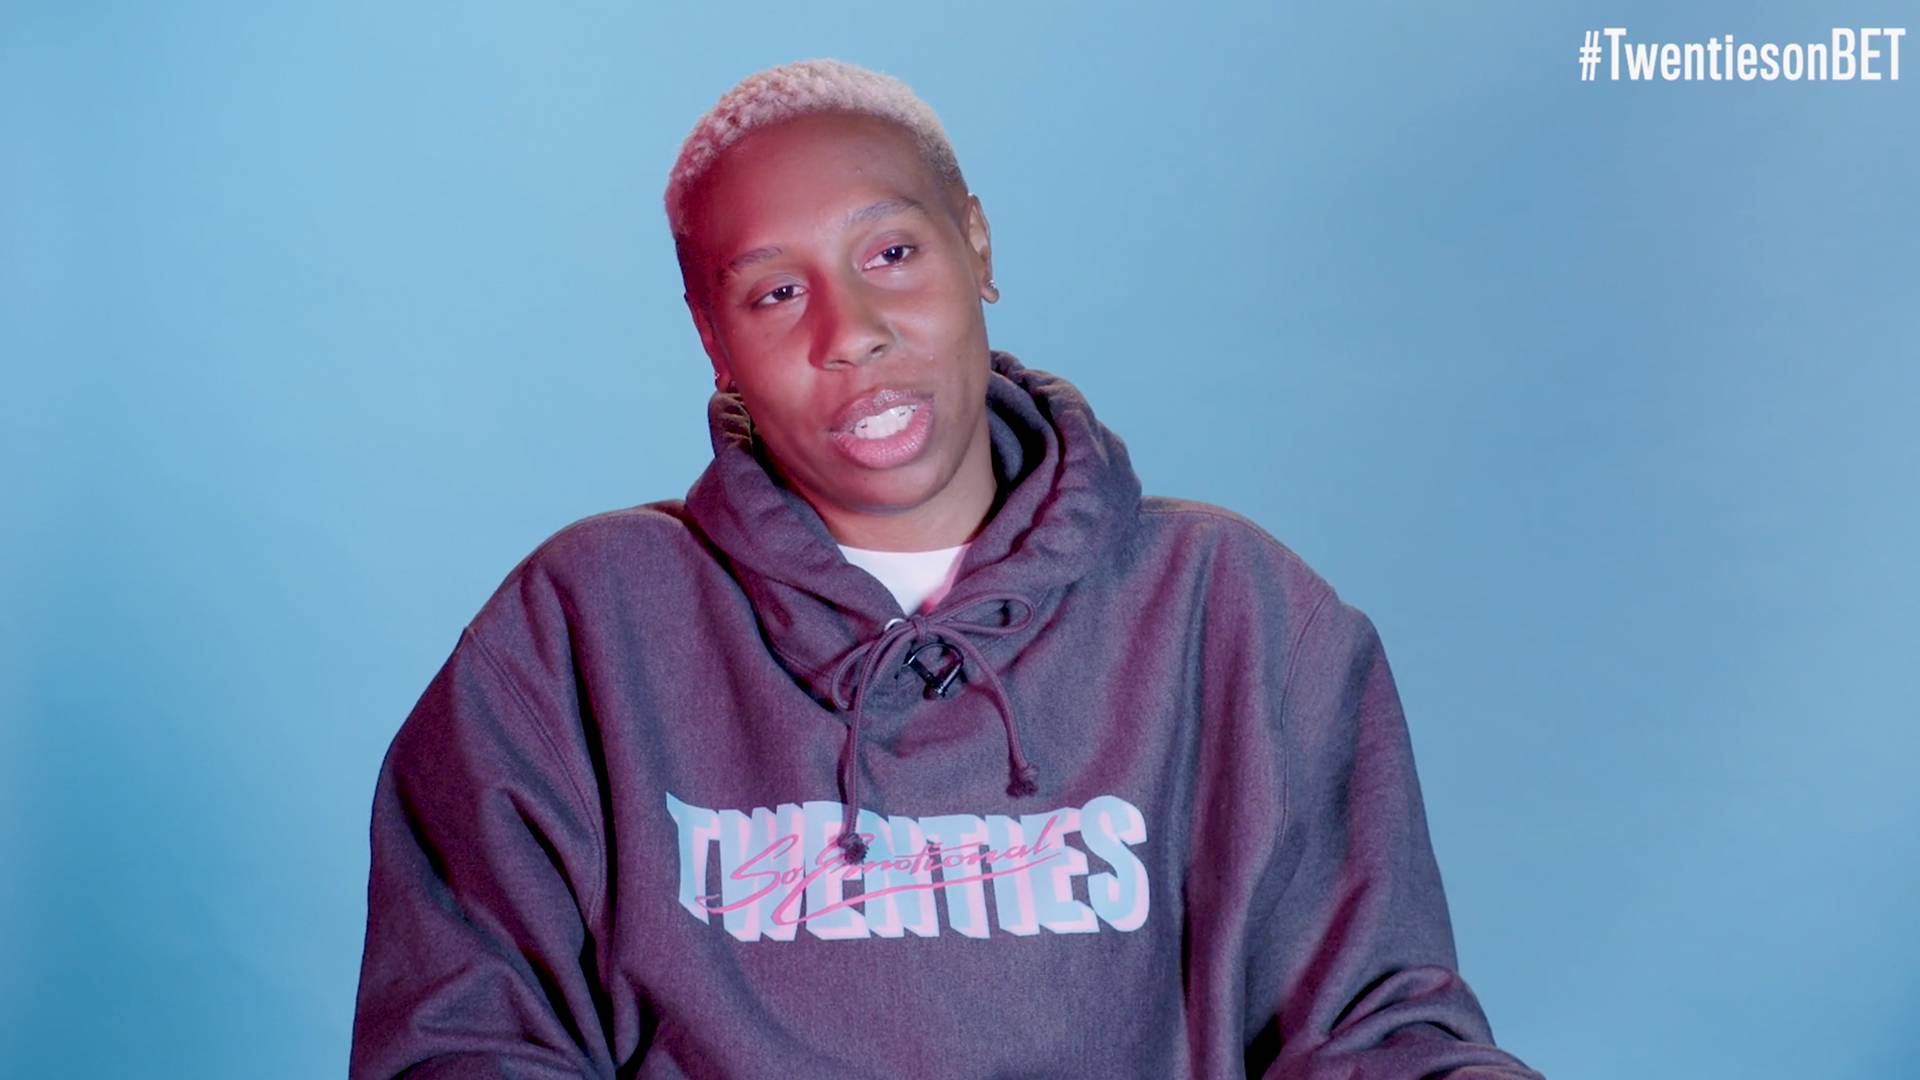 Lena Waithe talking about her new show Twenties on BET 2020.